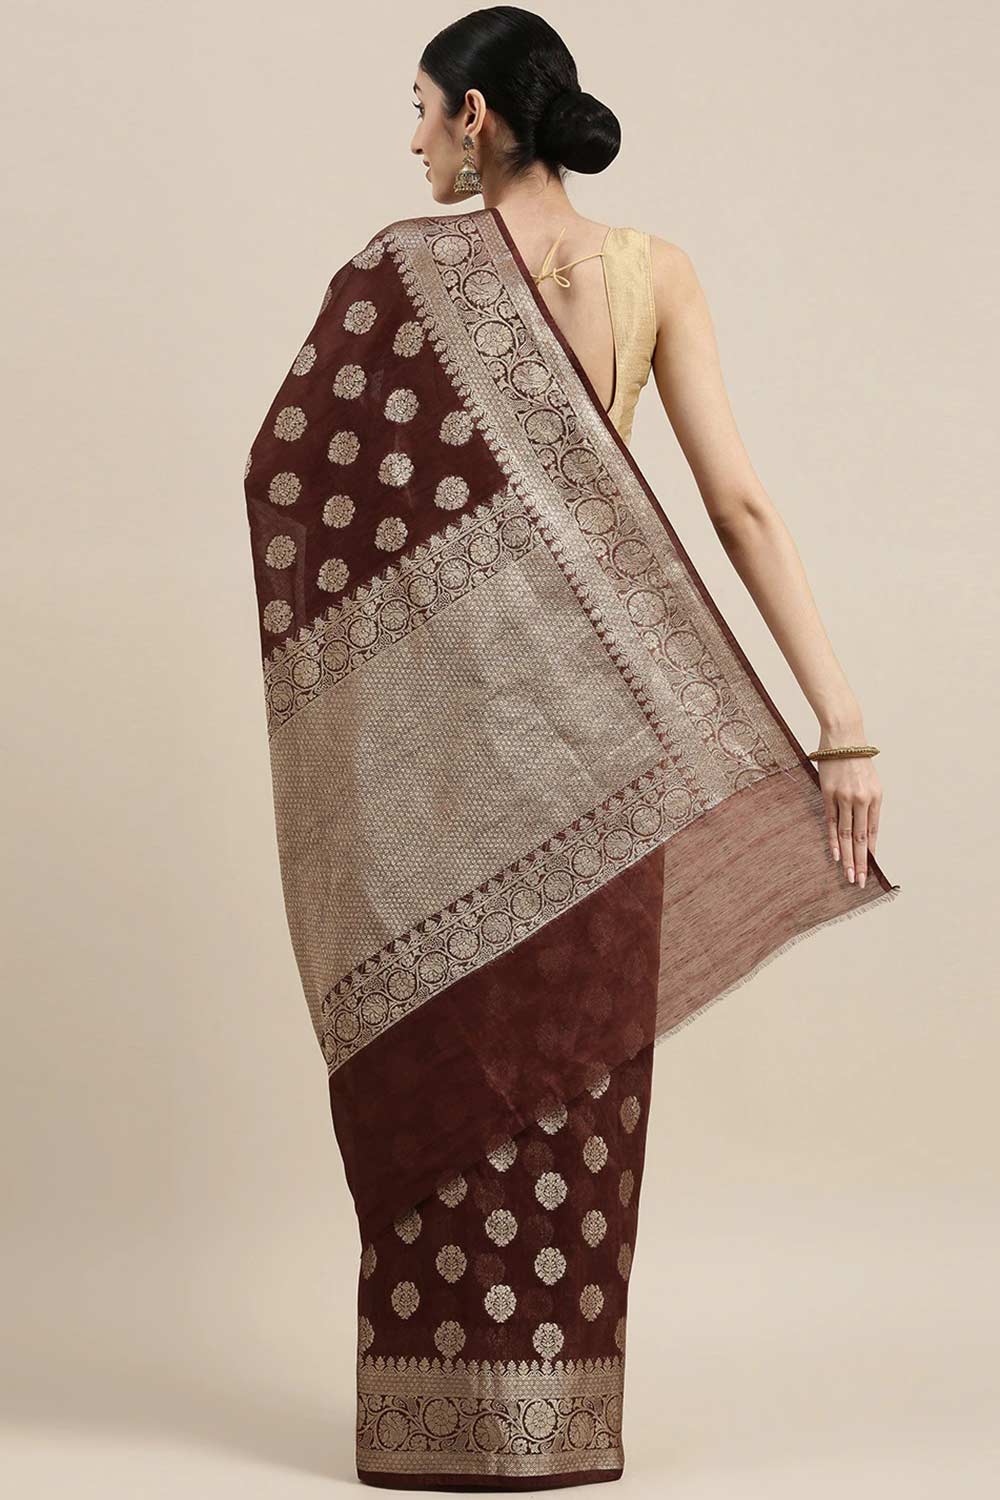 Shop Jenna Brown Zari Woven Pure Linen One Minute Saree at best offer at our  Store - One Minute Saree